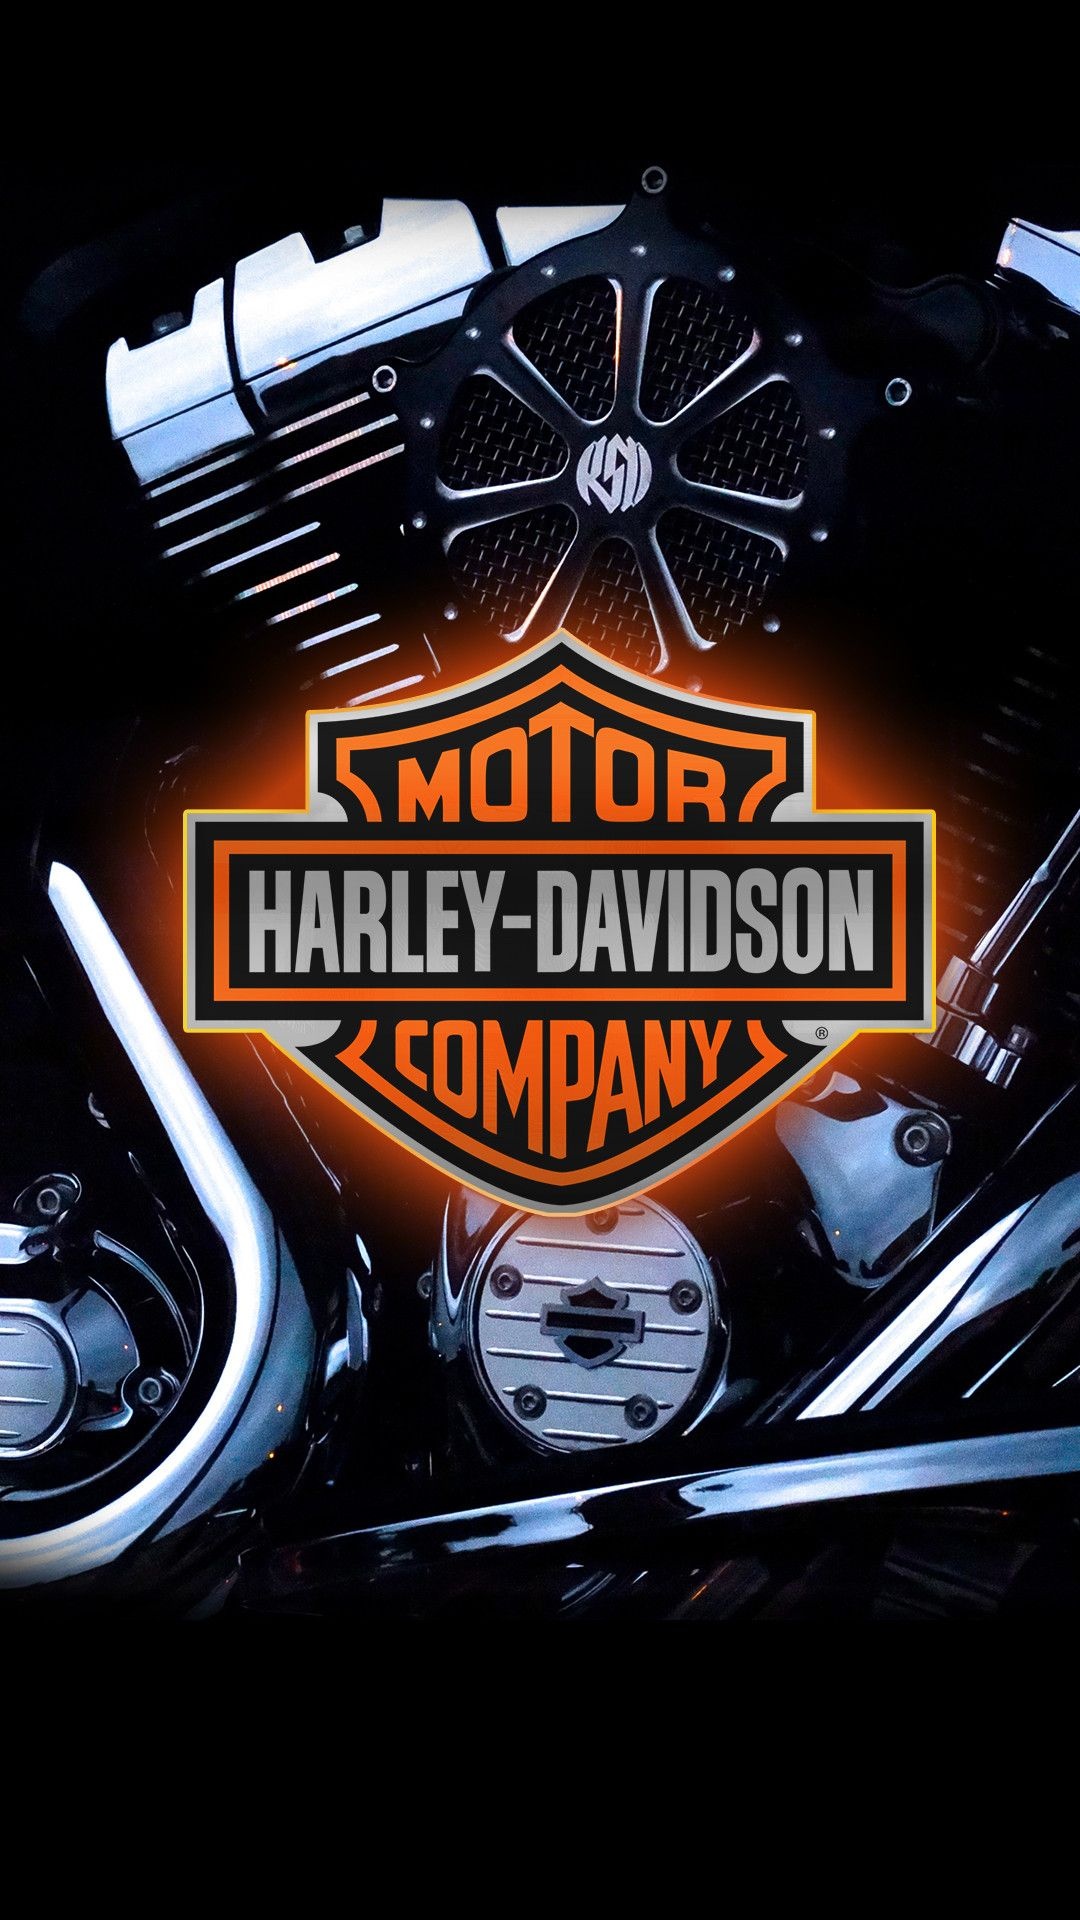 Harley-Davidson Logo, Auto, iPhone wallpapers, Cool wallpapers, 1080x1920 Full HD Handy